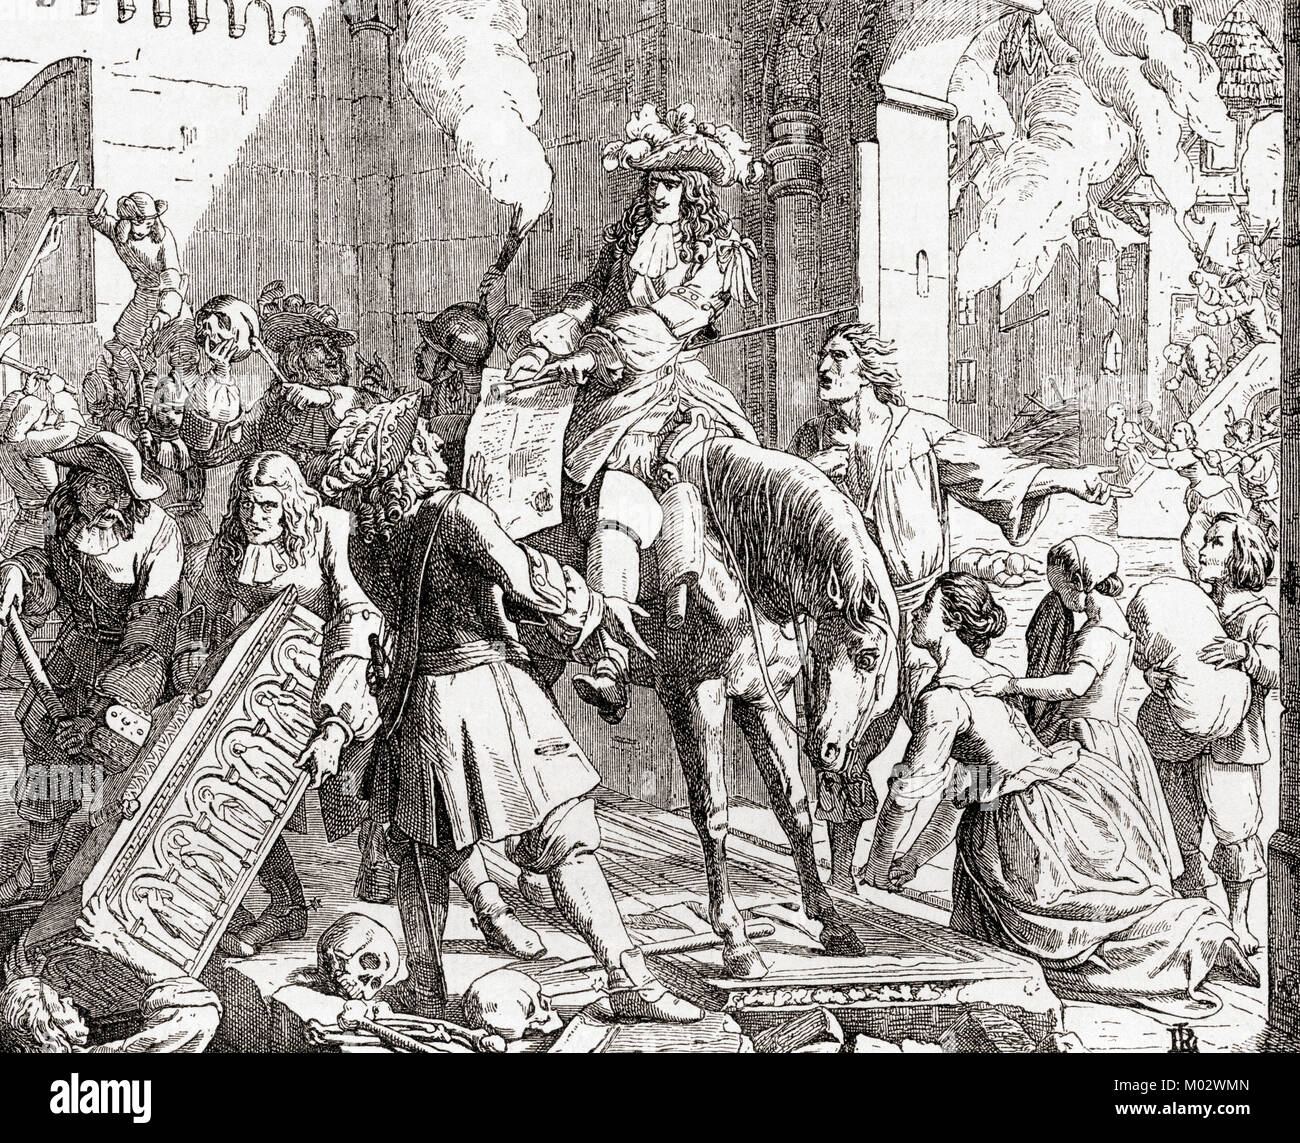 King Louis XIV of France in the palatinate at the start of the Nine Years' War (1688–97).   From Ward and Lock's Illustrated History of the World, published c.1882. Stock Photo